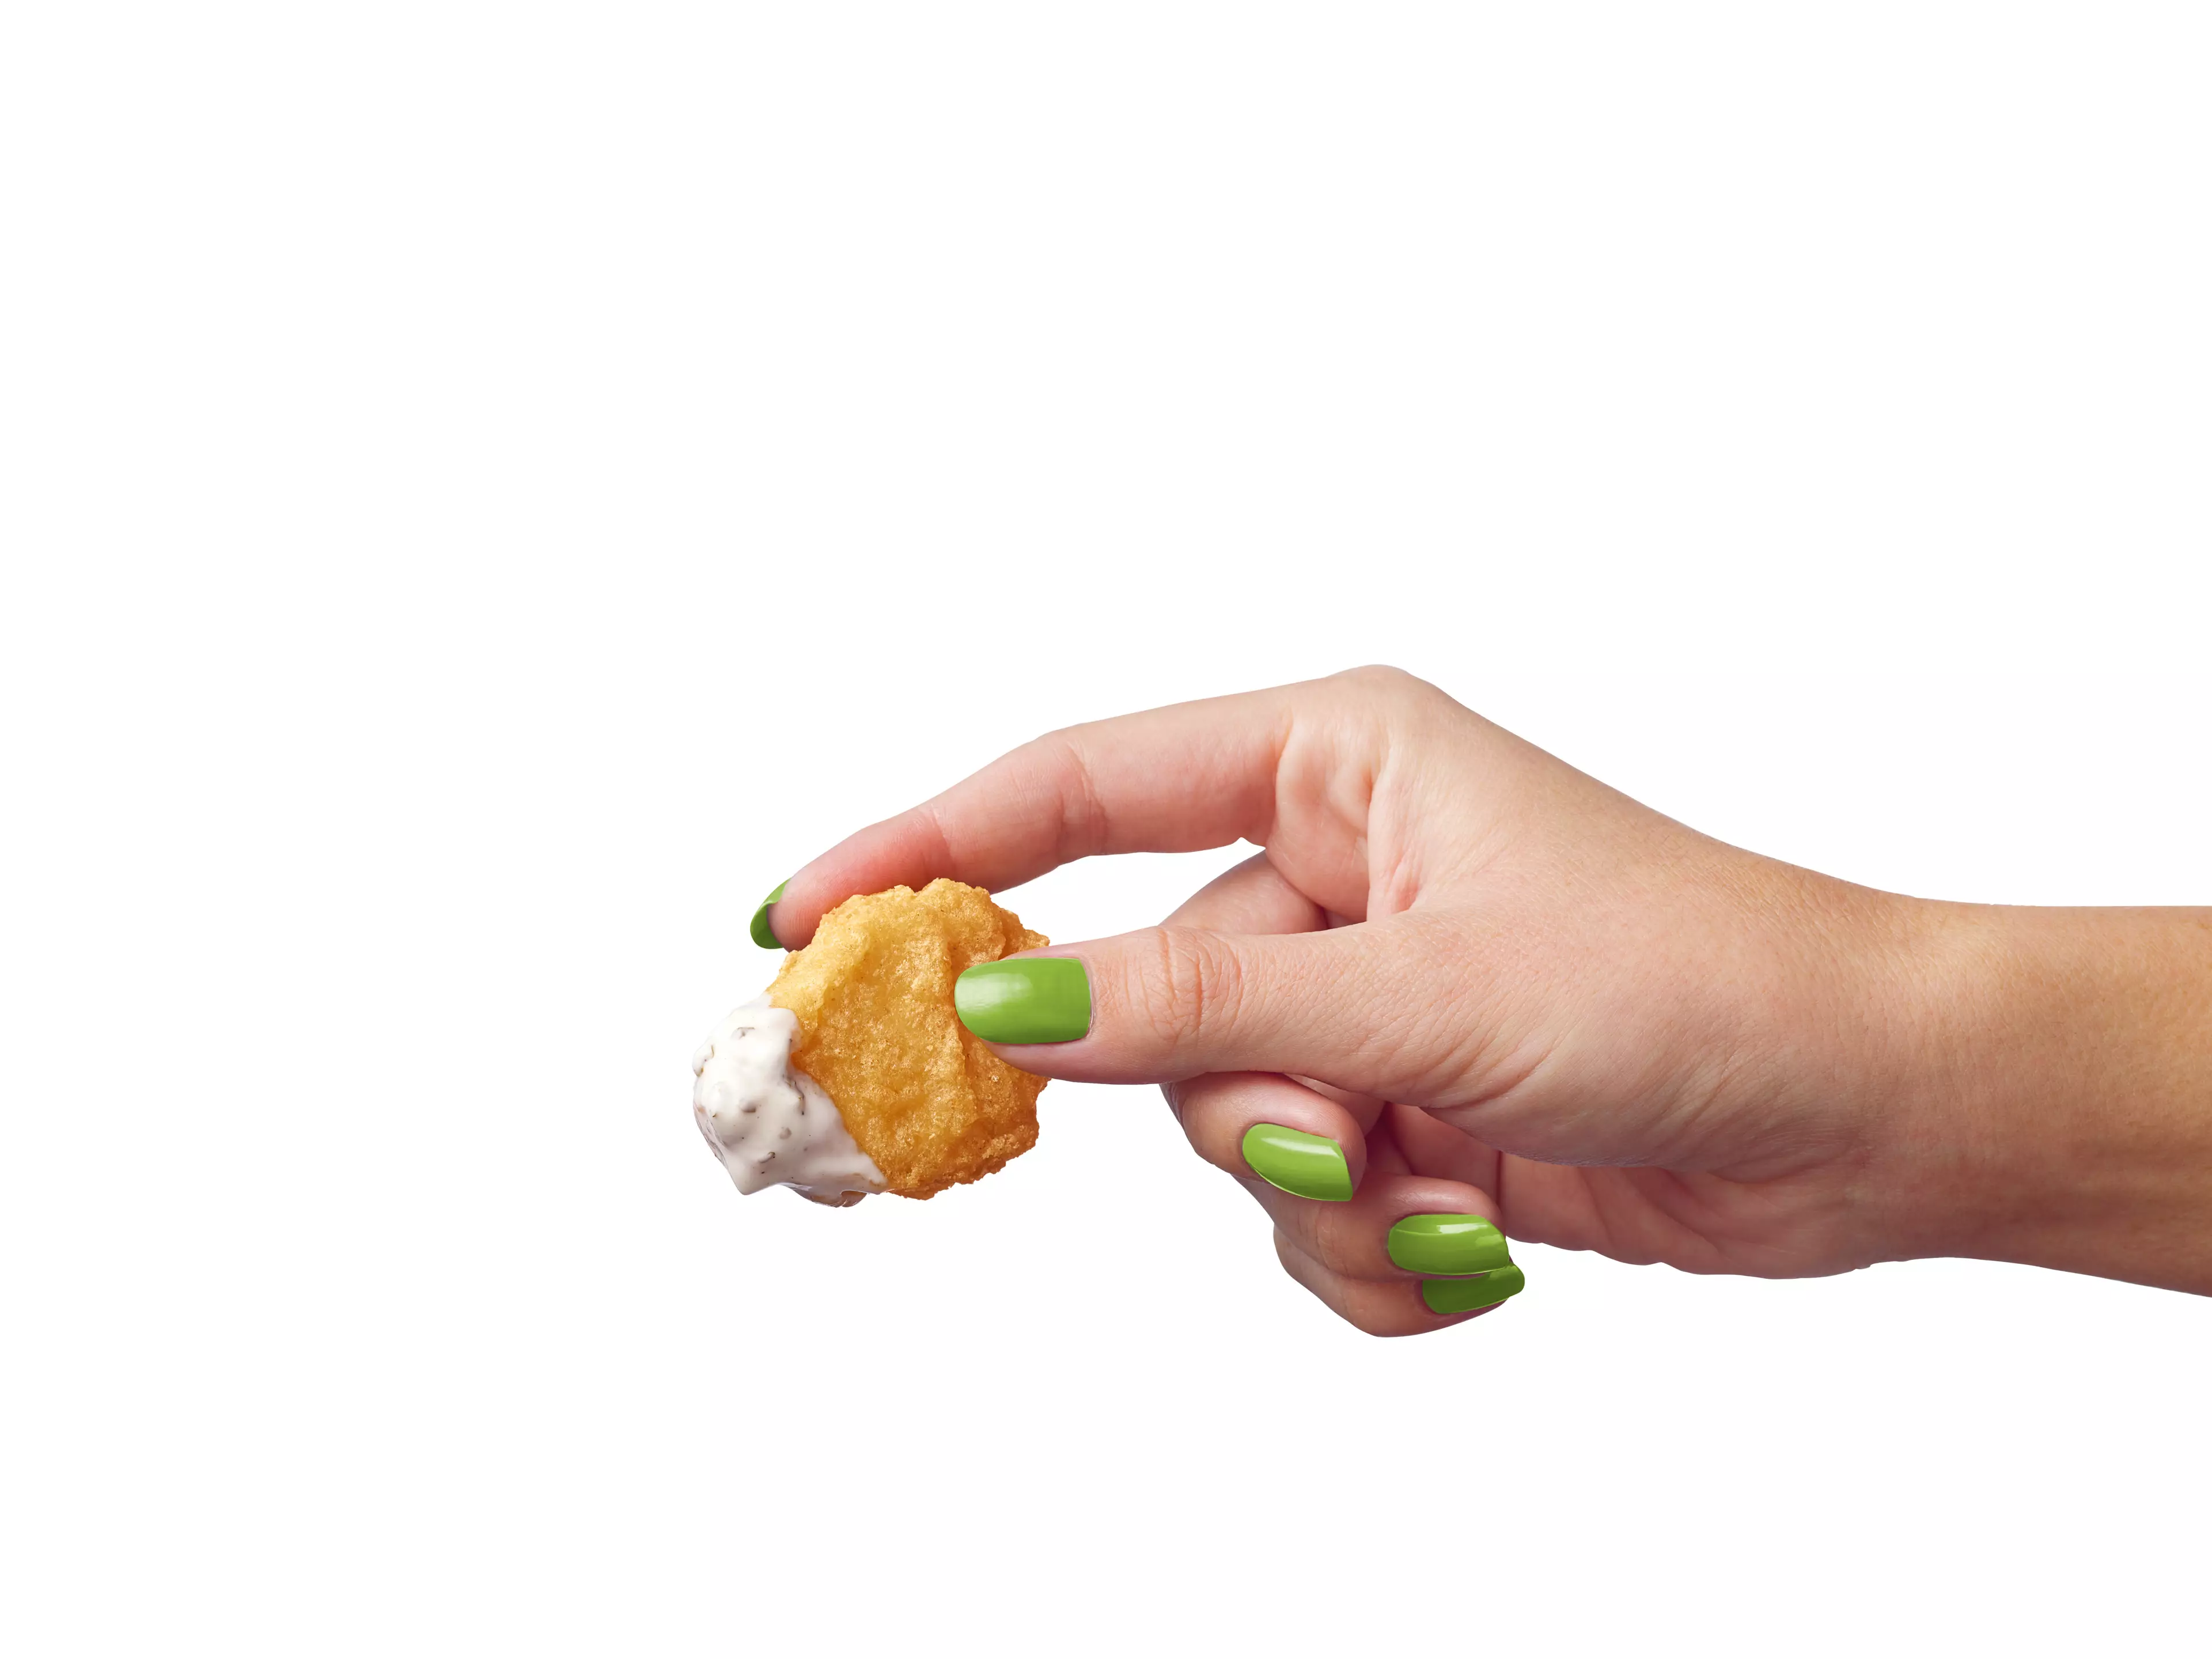 McDonald's has just launched four new sauces for dipping McNuggets.